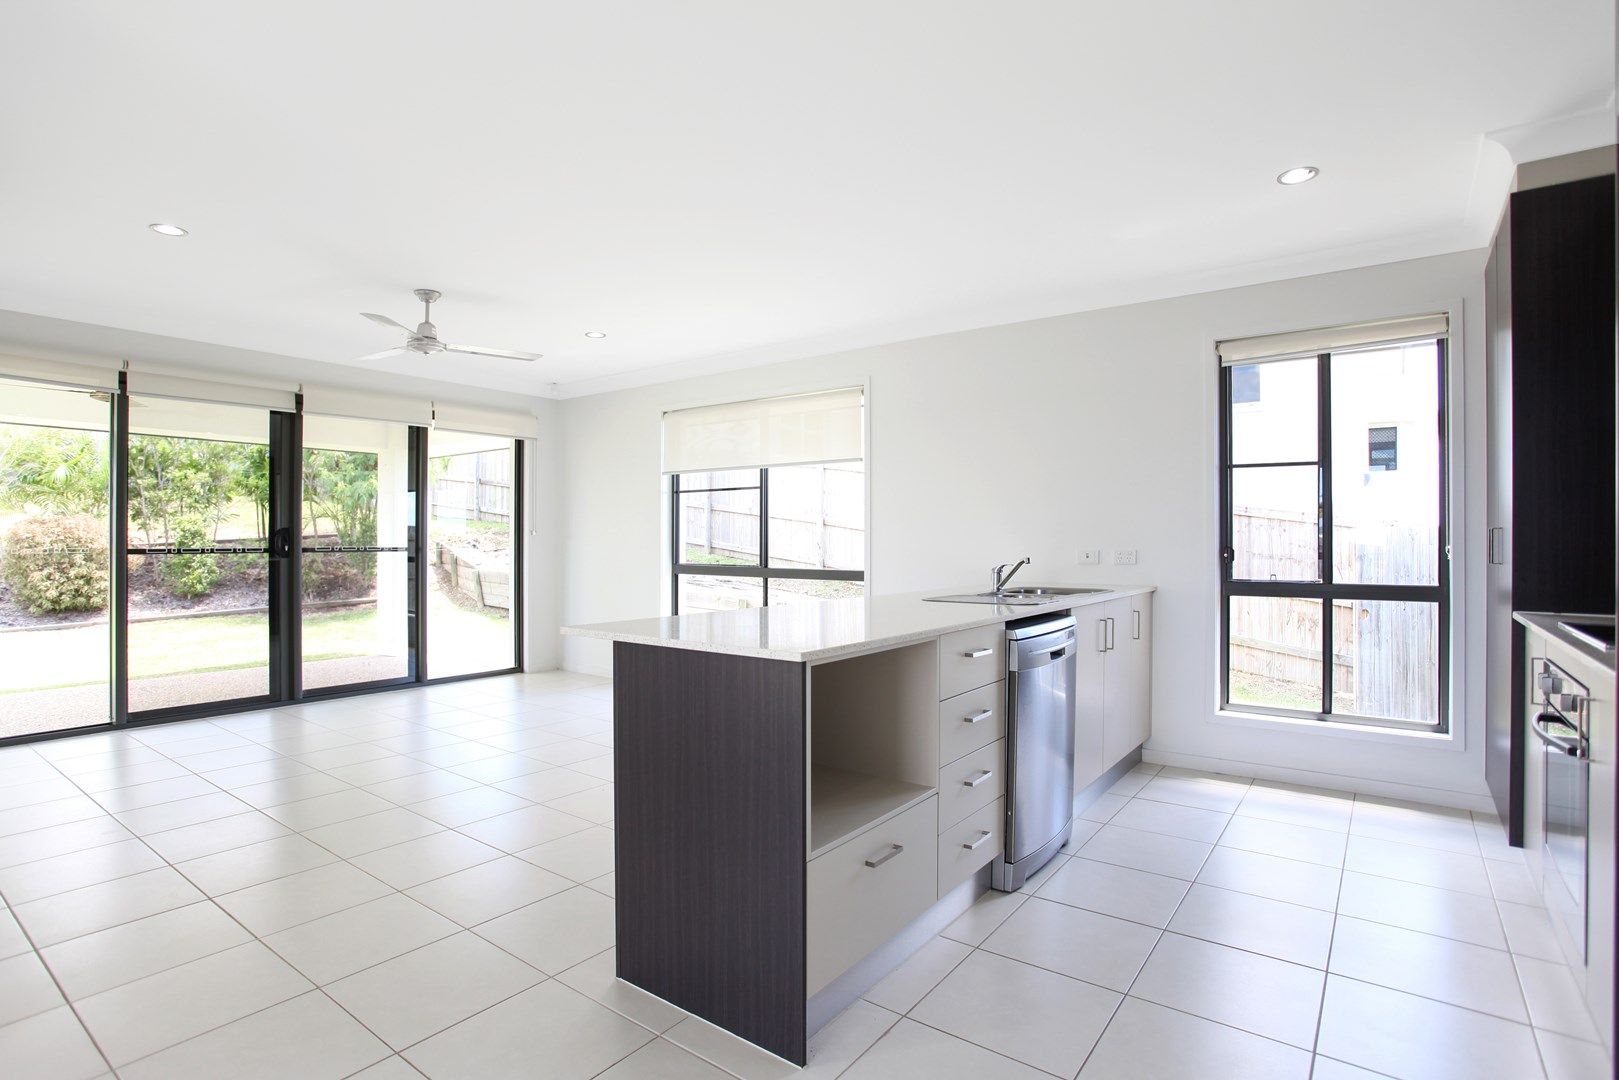 7 Brearley Ct, Rural View QLD 4740, Image 0